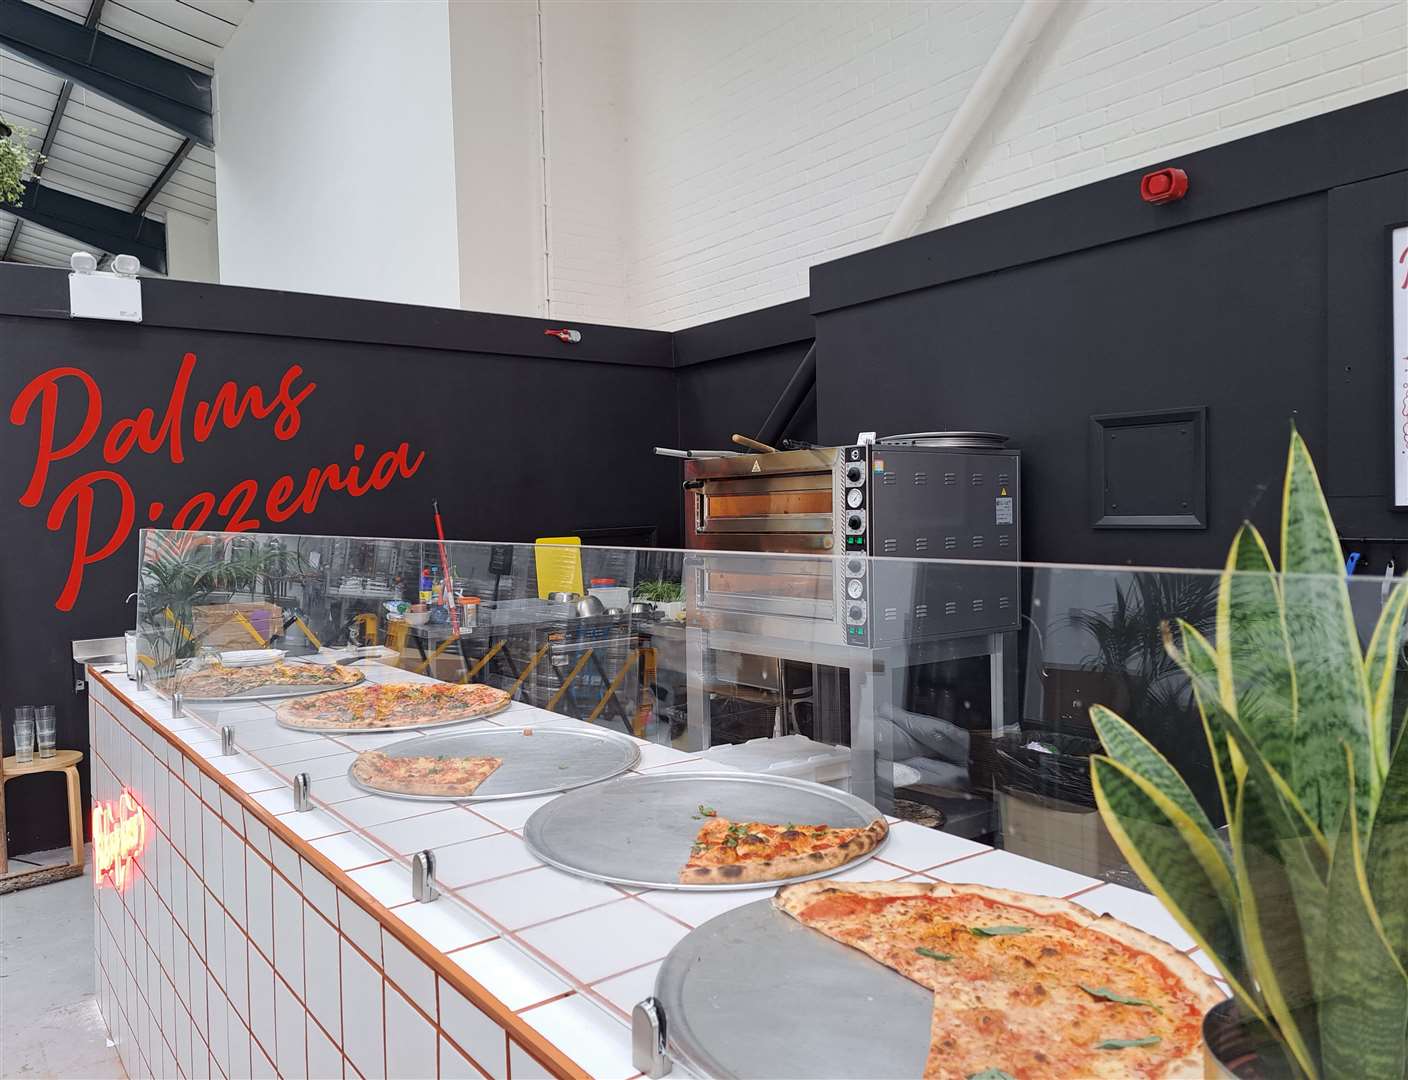 Palms Pizzeria, Canterbury offers an array of pizzas all sold by the slice